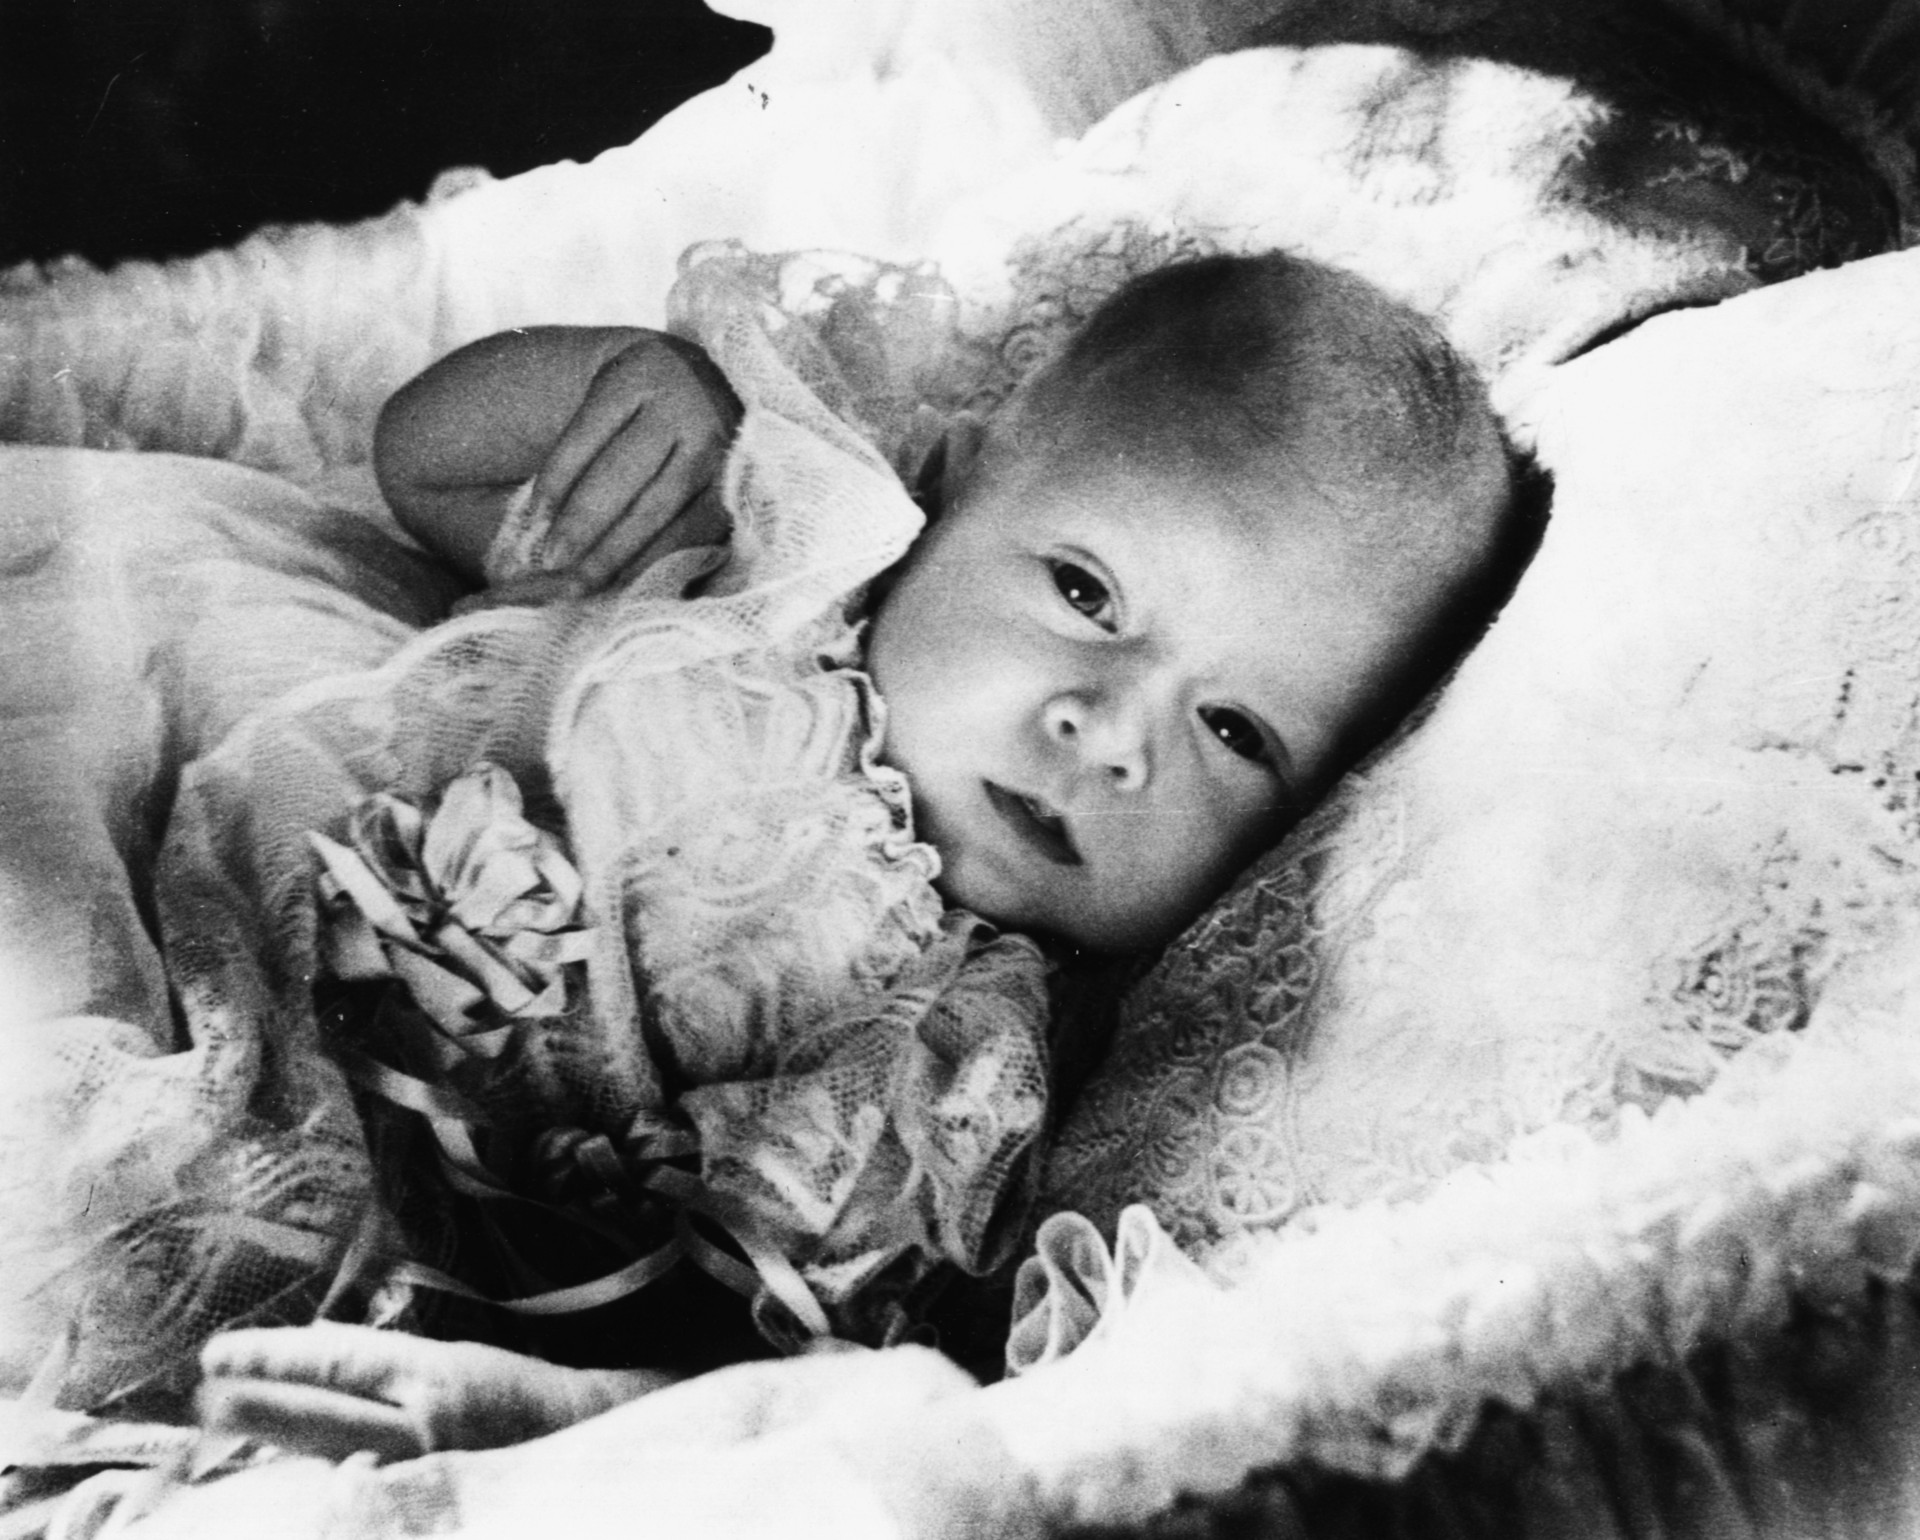 Prince Charles as a newborn in his crib in 1949.<p>You may also like:<a href="https://www.starsinsider.com/n/337627?utm_source=msn.com&utm_medium=display&utm_campaign=referral_description&utm_content=203154v10en-au"> Meet the famous figures who have battled cancer</a></p>